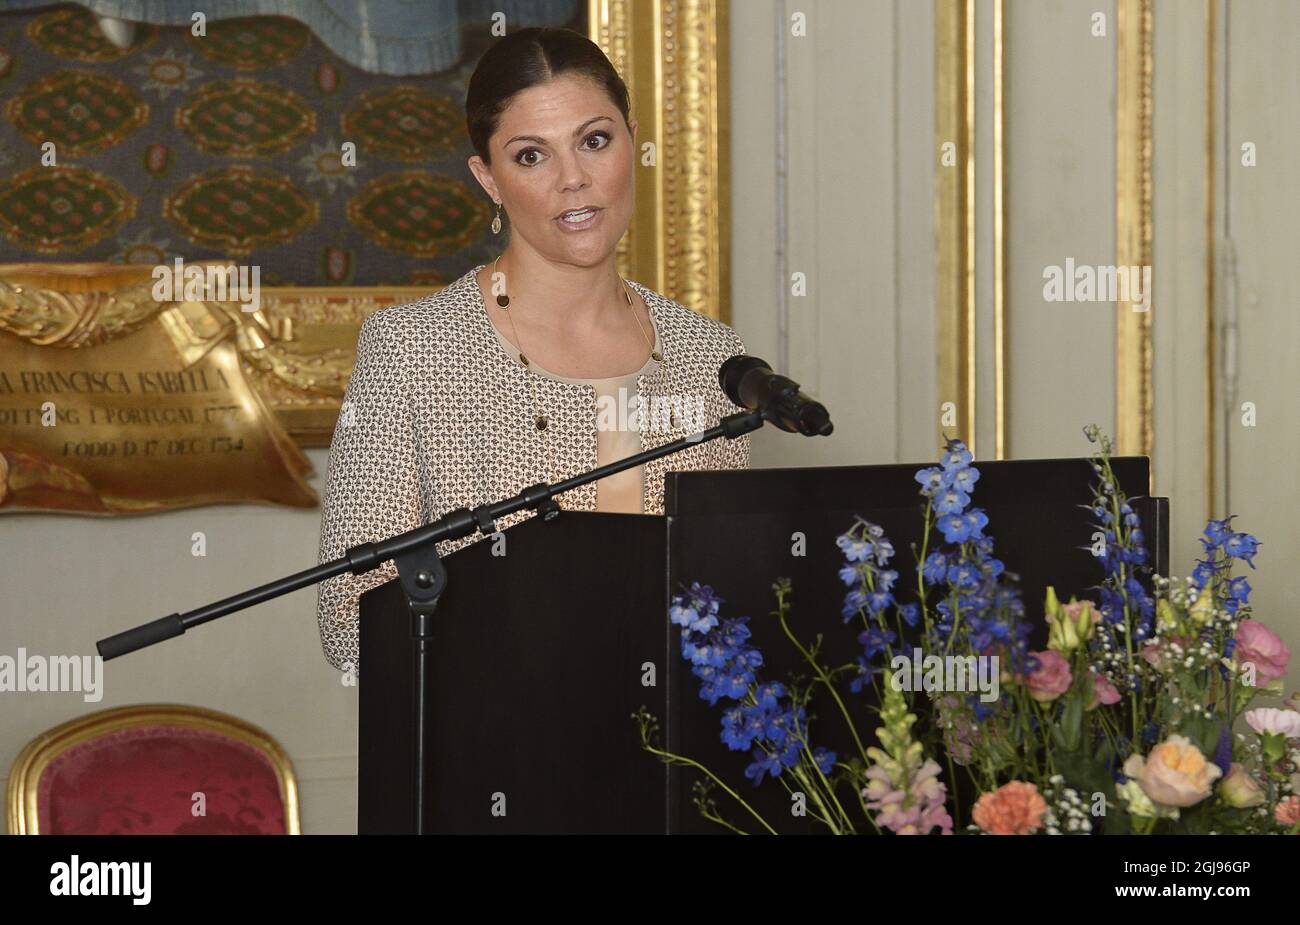 GRIPSHOLM 2015-05-13 Crown Princess Victoria is seen during the inauguration of 'Queen Hedvig Eleonora's jubilee year 2015' at th Gripsholms Palace in Marifered, Sweden May 13, 2015. Queen Hedvig Eleonora (1636-1715) was born in Holstein-Gottorp in present Germany and married to King Karl X Gustav. Foto Jonas Ekstromer / TT / kod 10030  Stock Photo